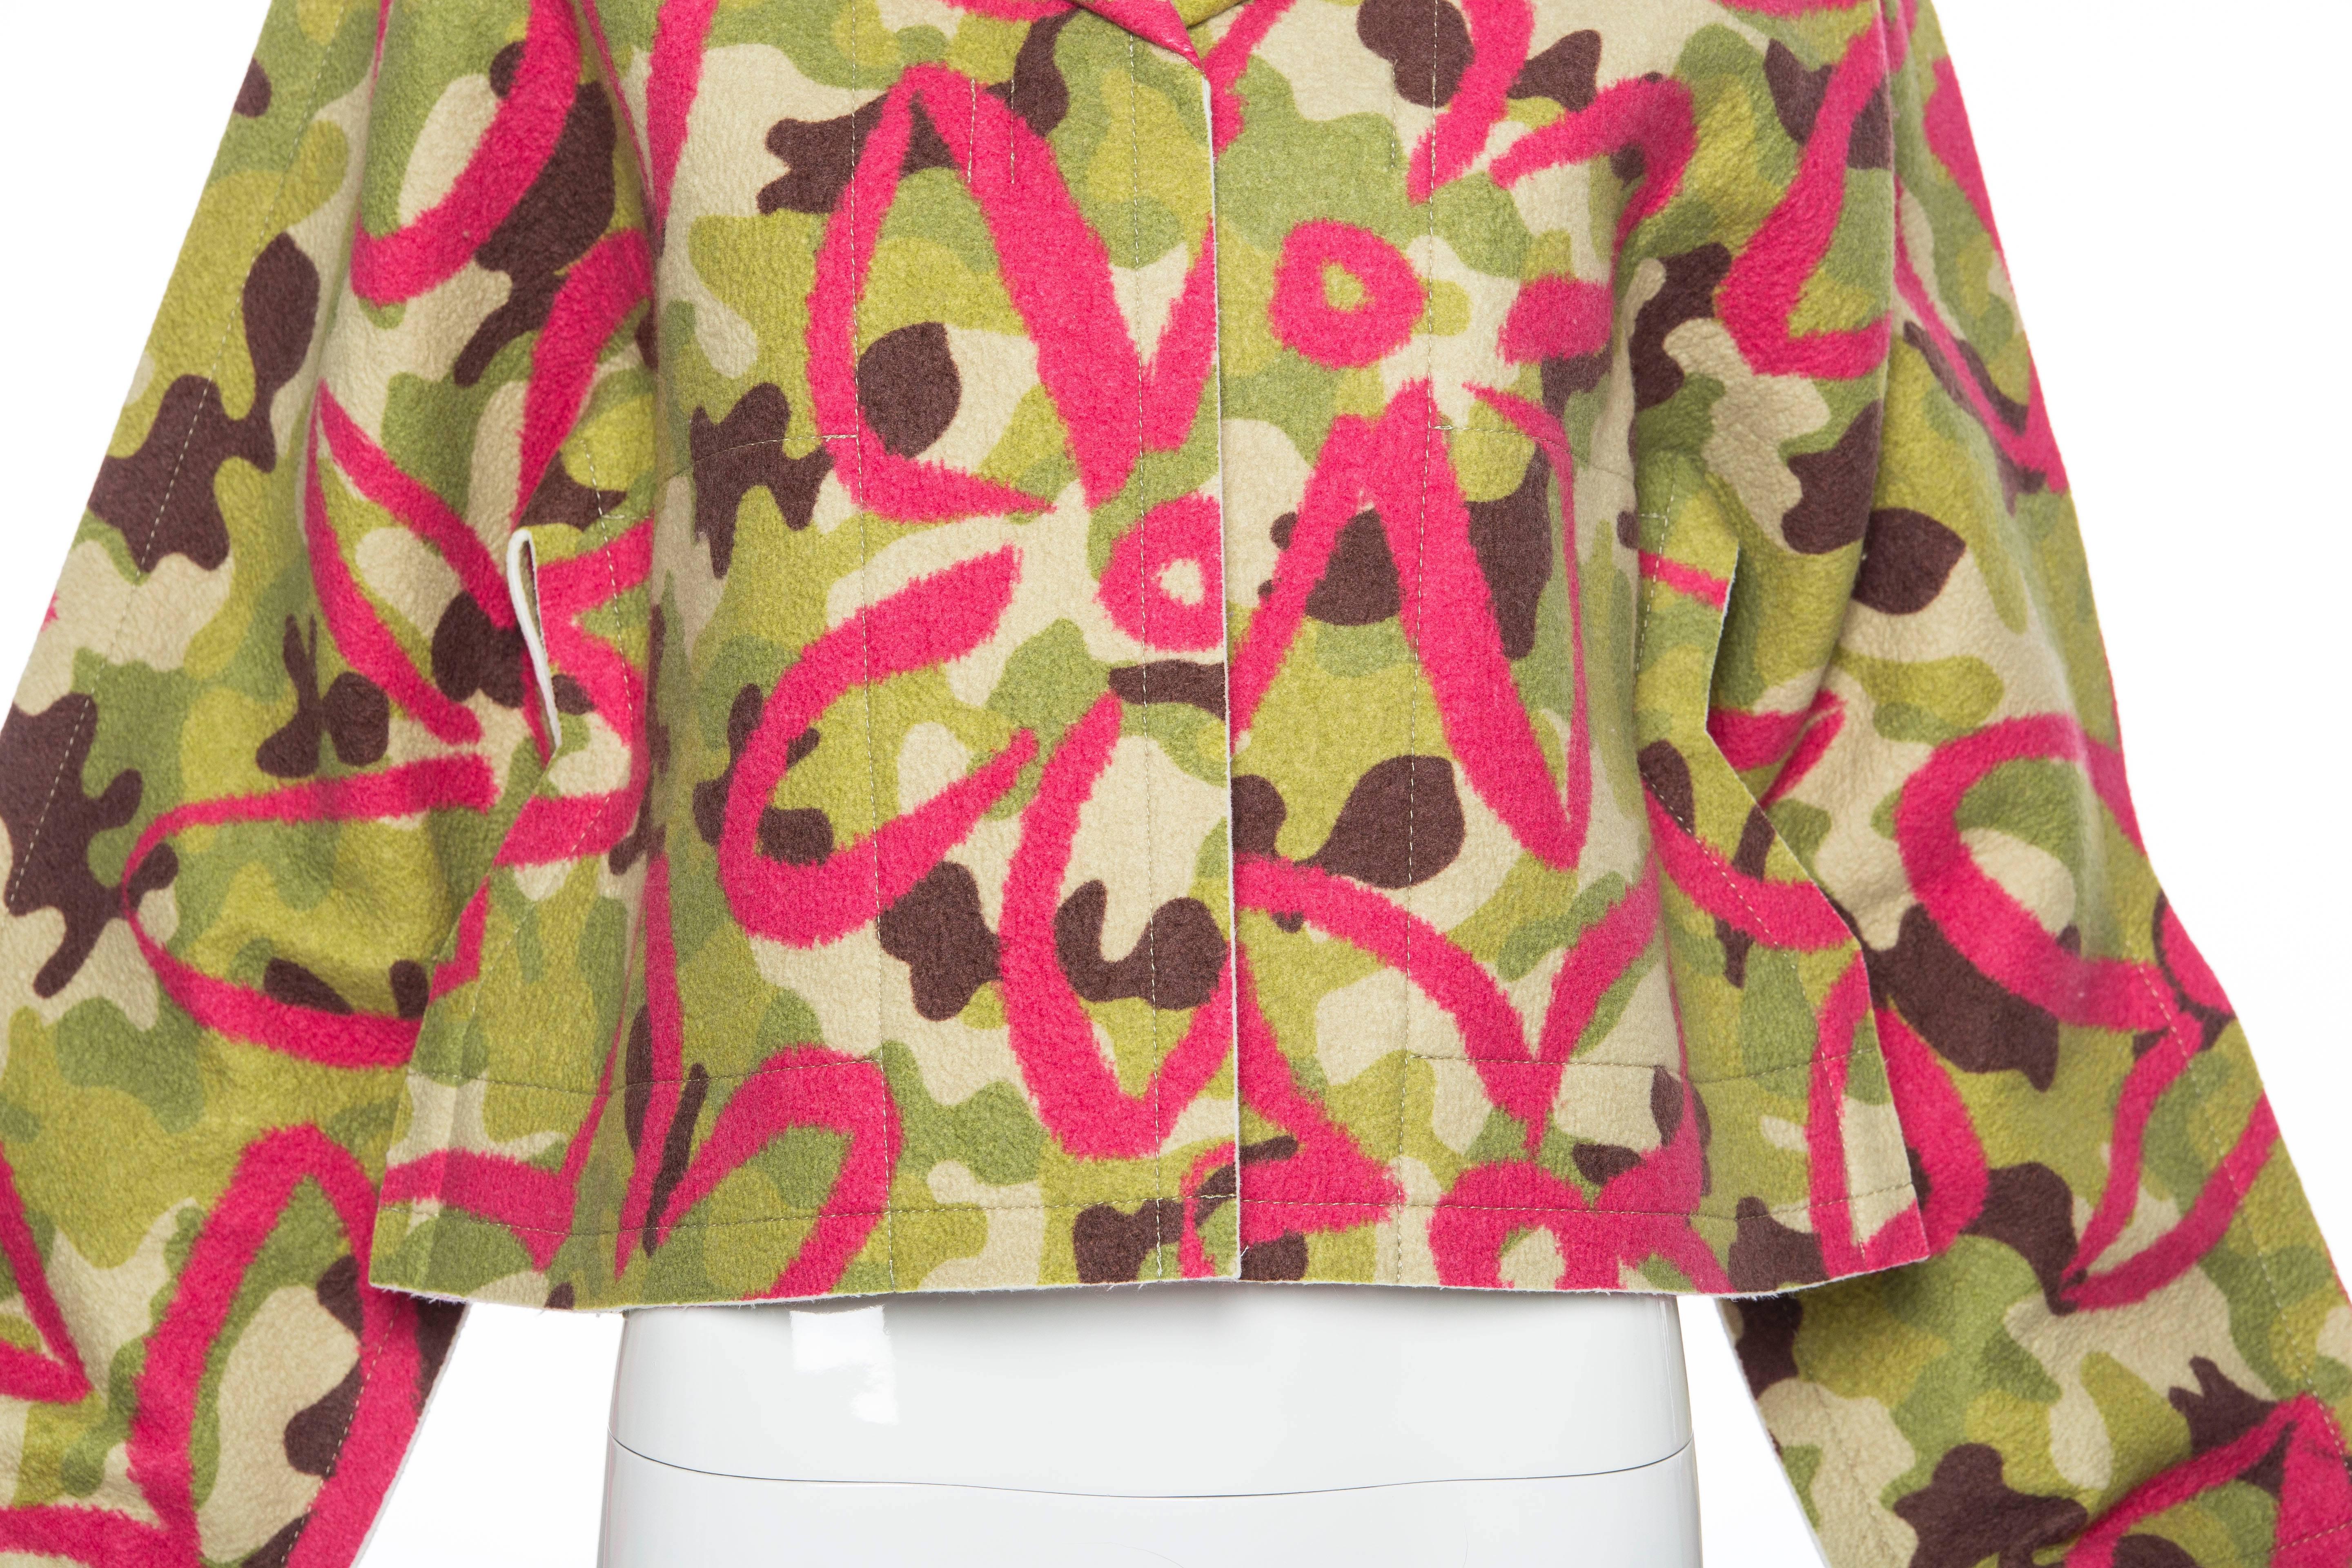 Women's Comme des Garcons Runway 'Flat' or '2D'  Collection Camouflage Jacket, Fall 2012 For Sale